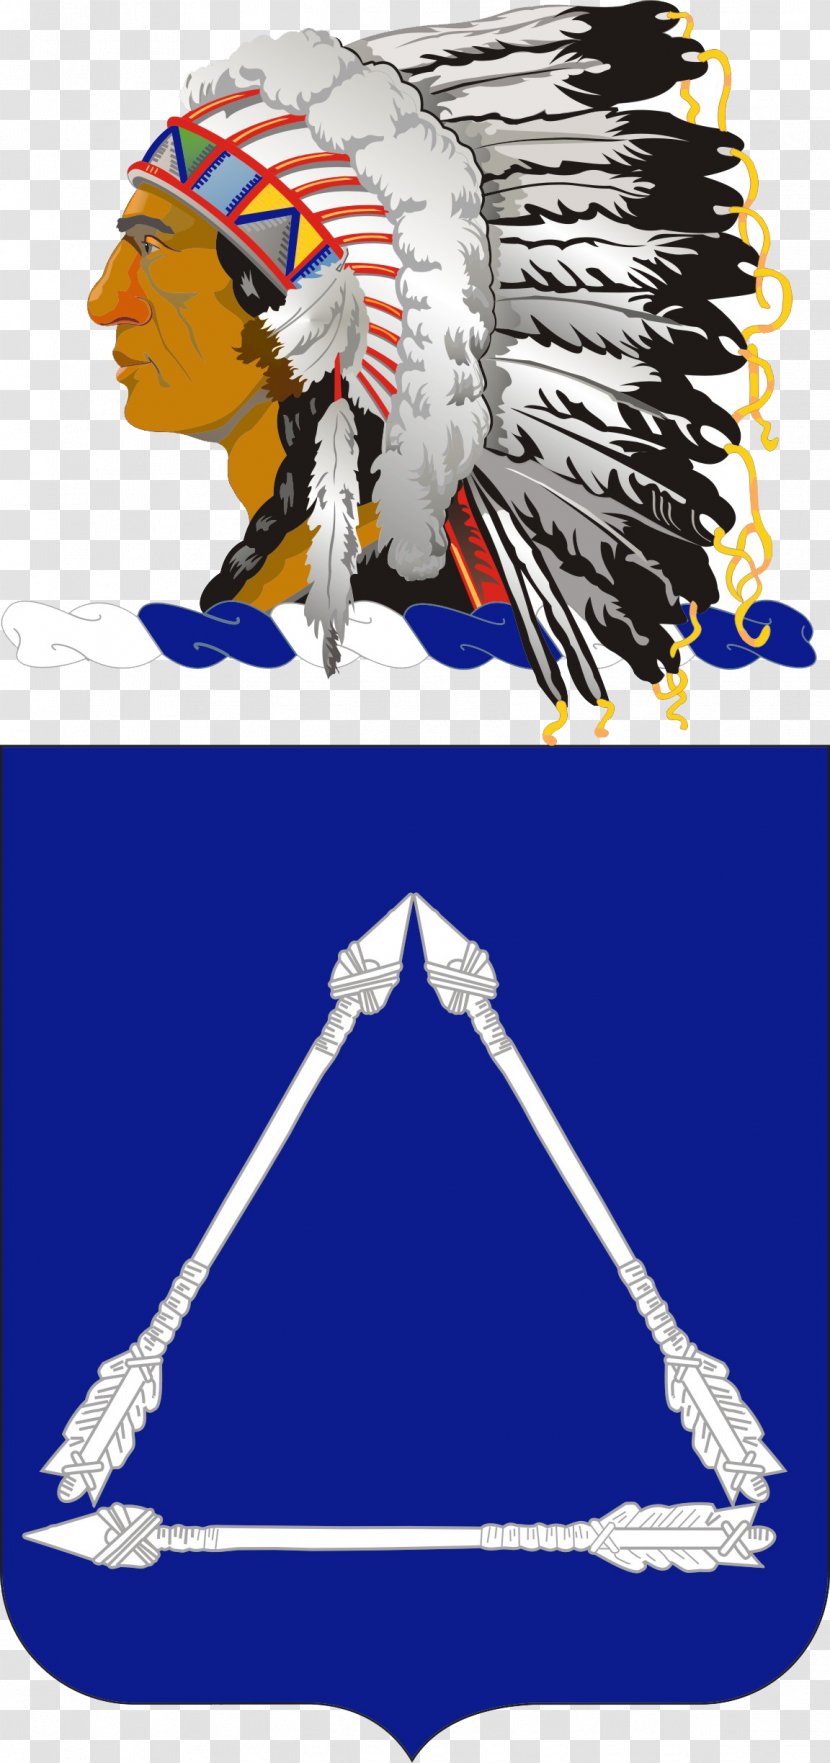 United States 180th Cavalry Regiment 45th Infantry Division Brigade Combat Team - Army Transparent PNG